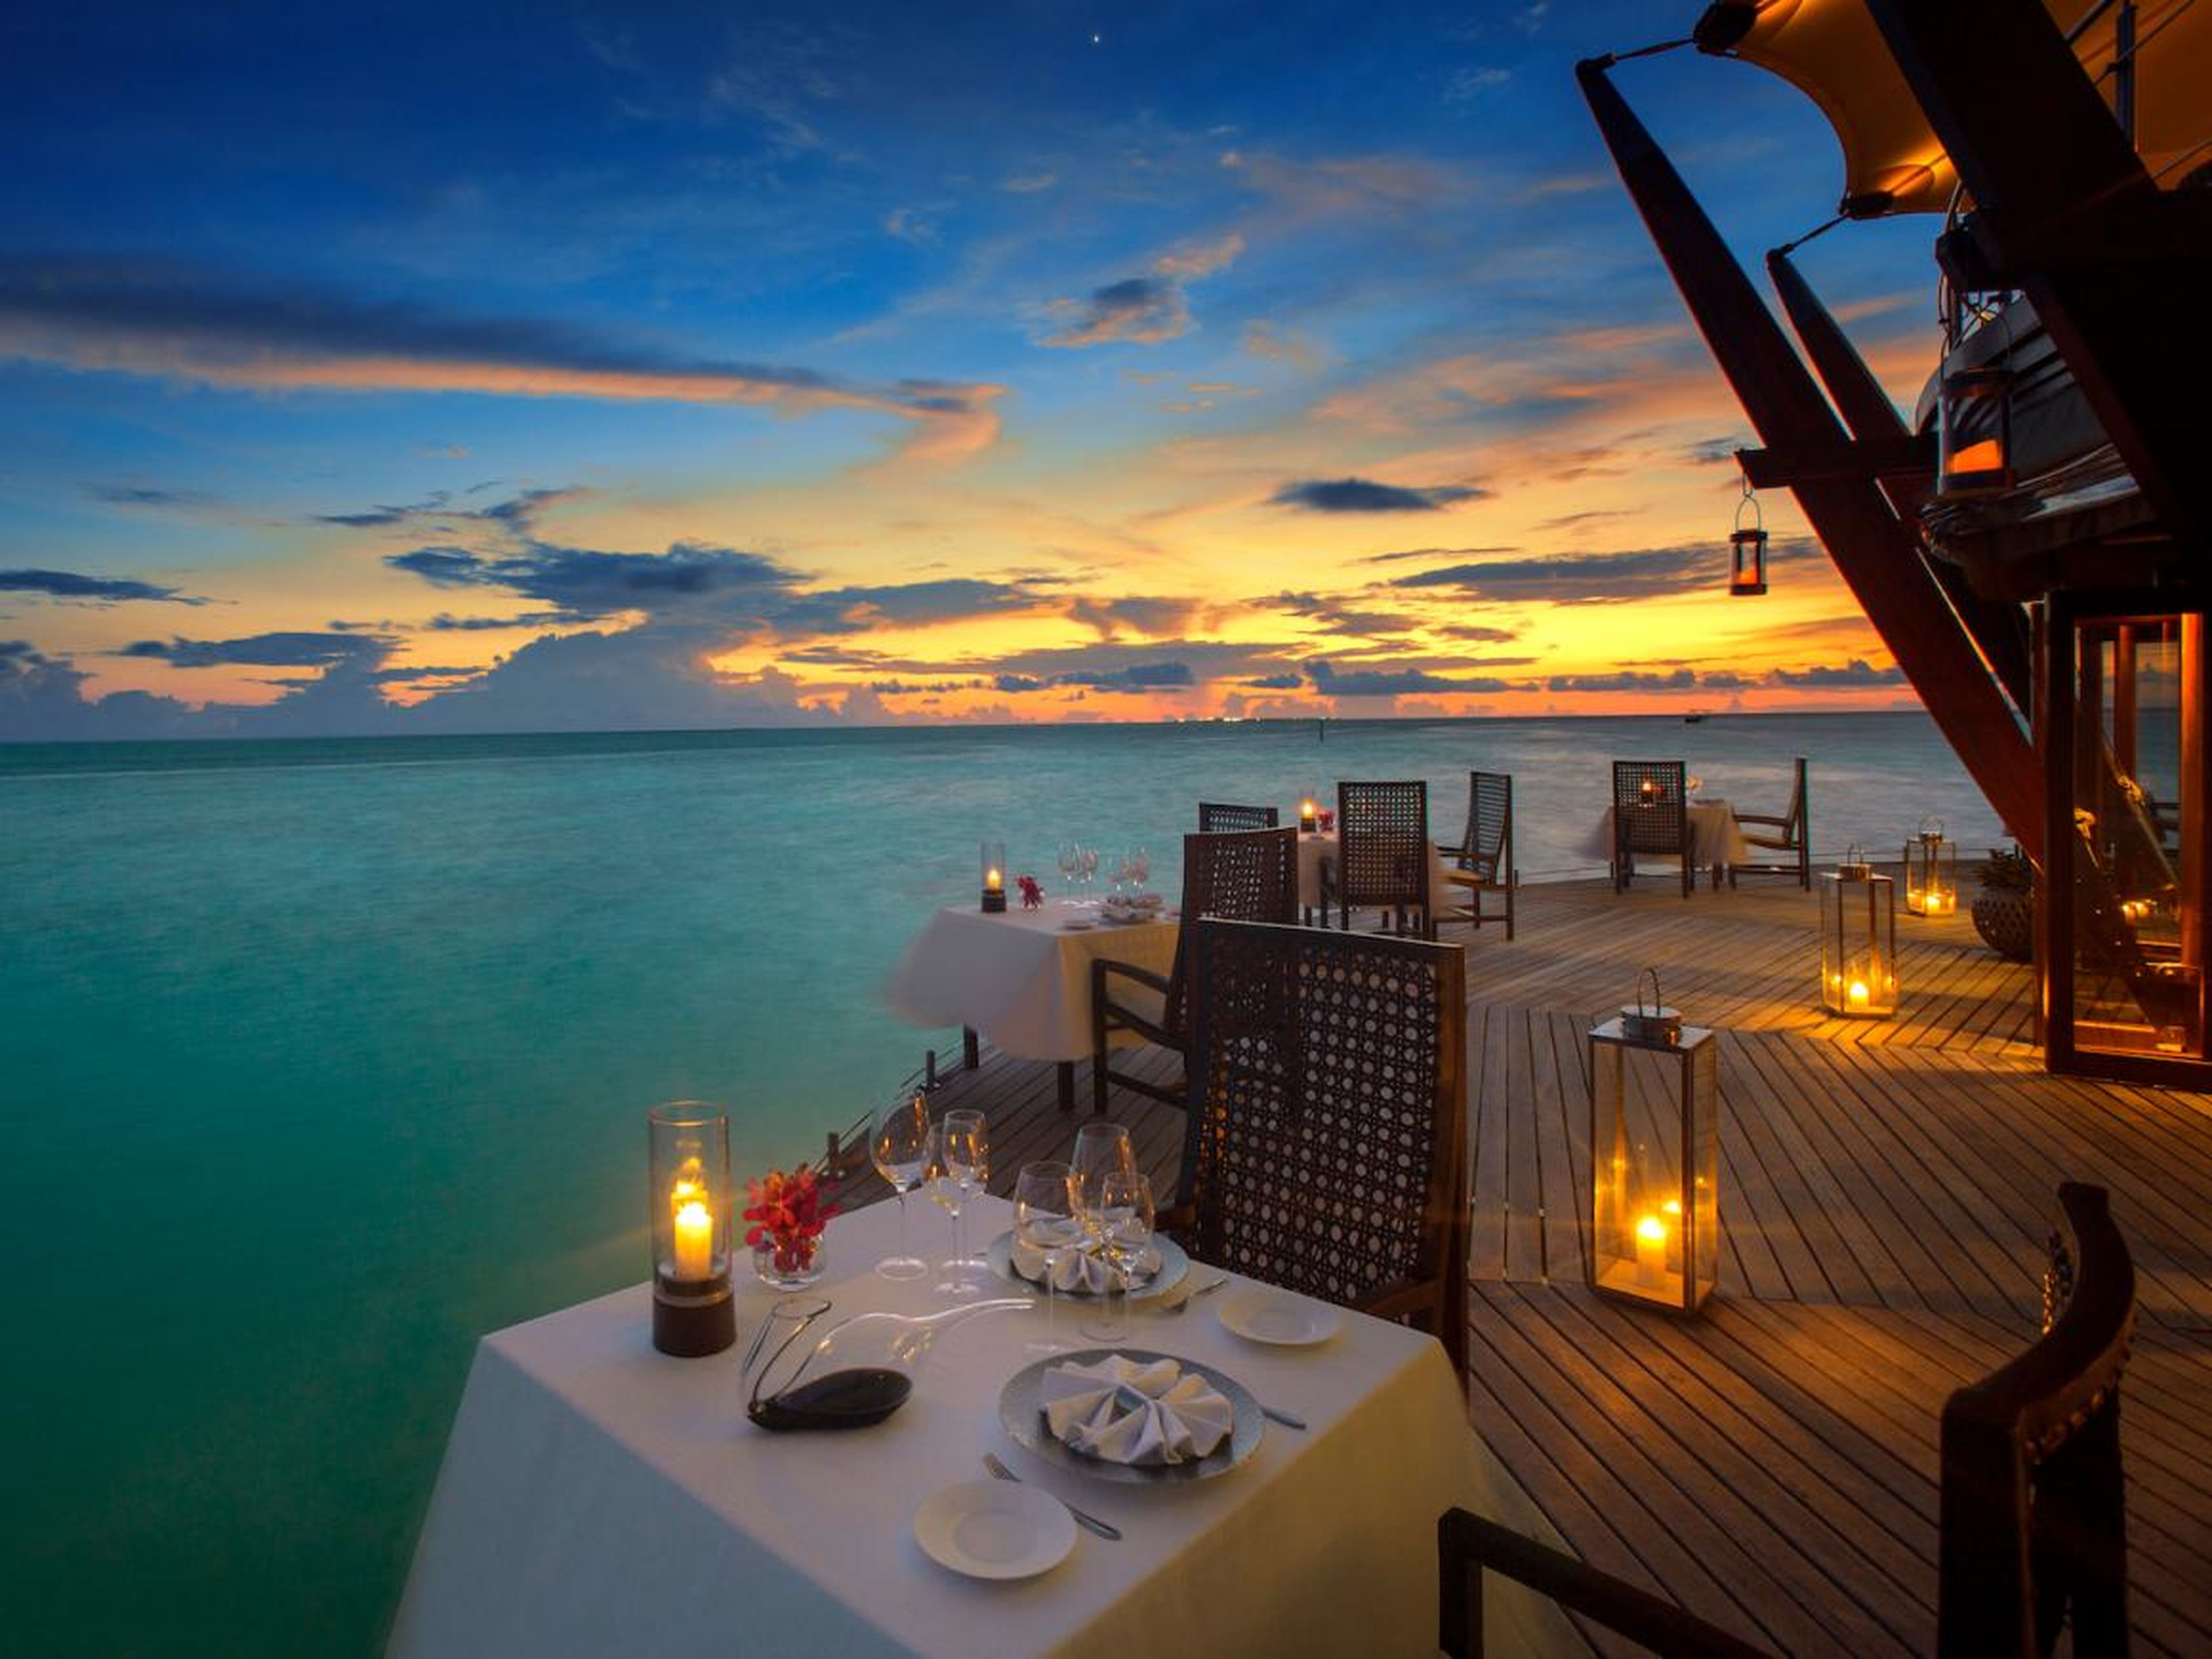 The resort offers plenty of romantic dining and drinking options.